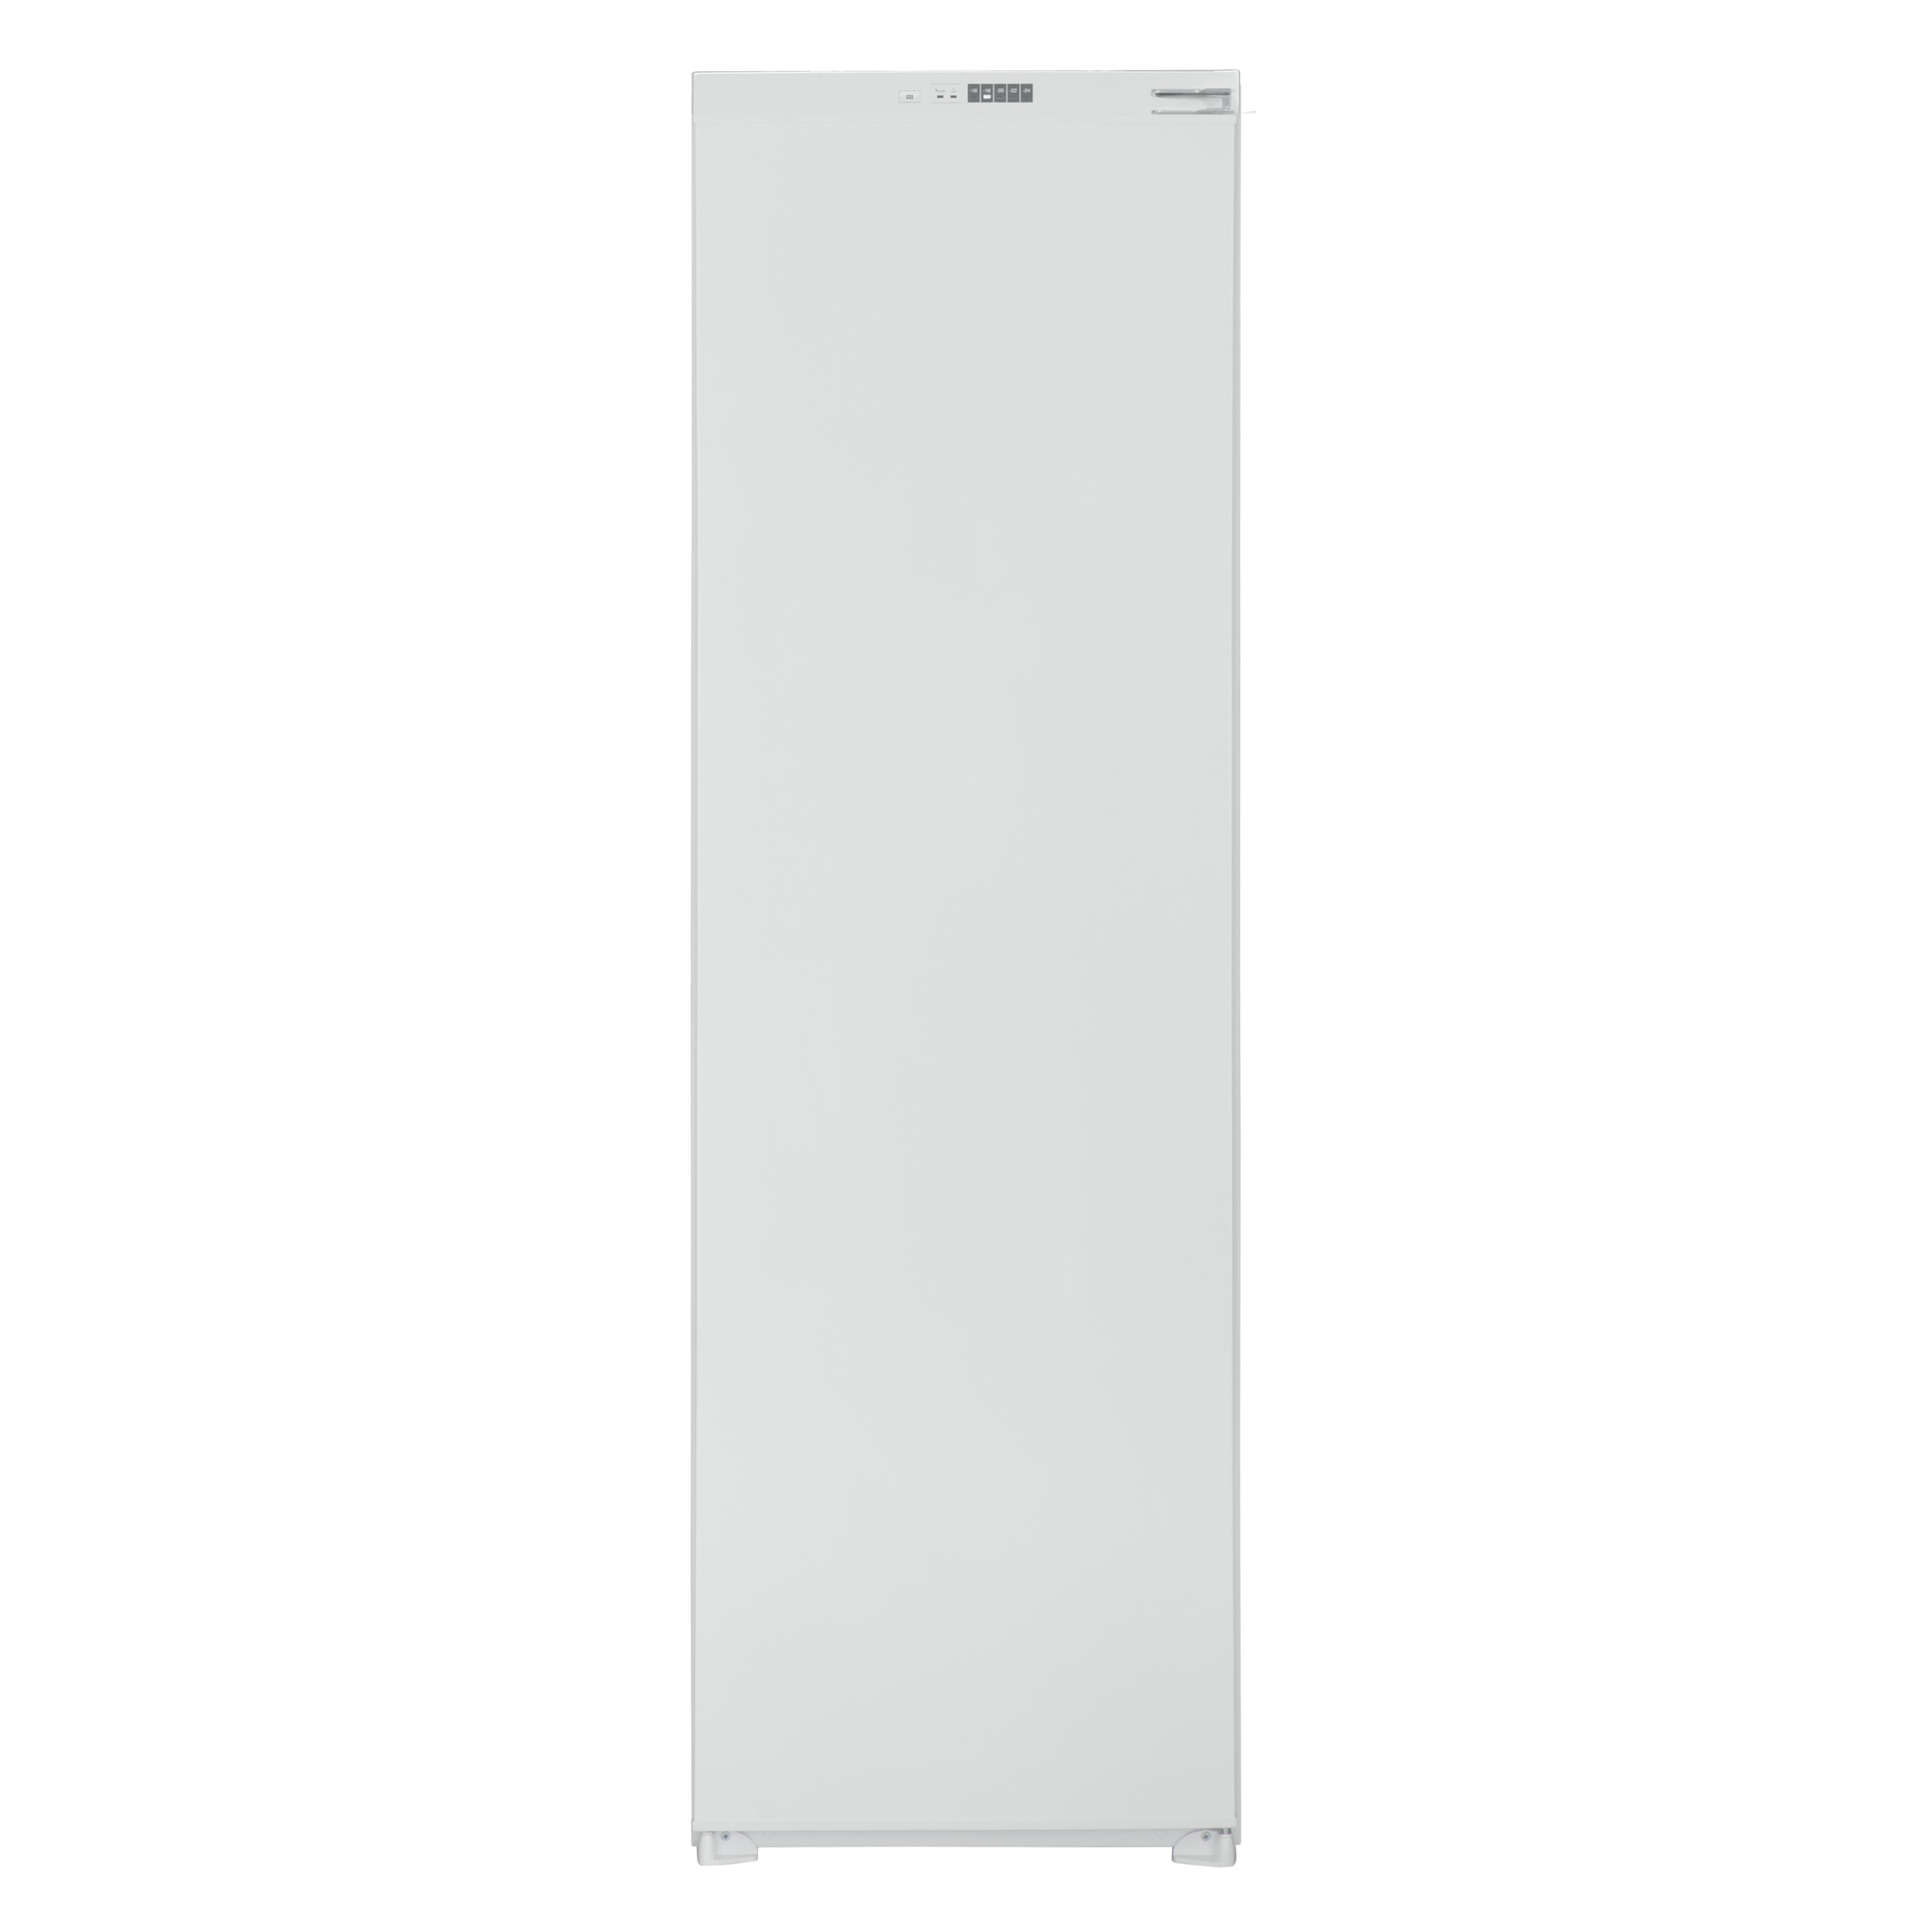 60cm tall freezer with a gross capacity of 221L. Features a manual thermostat and reversible doors. 